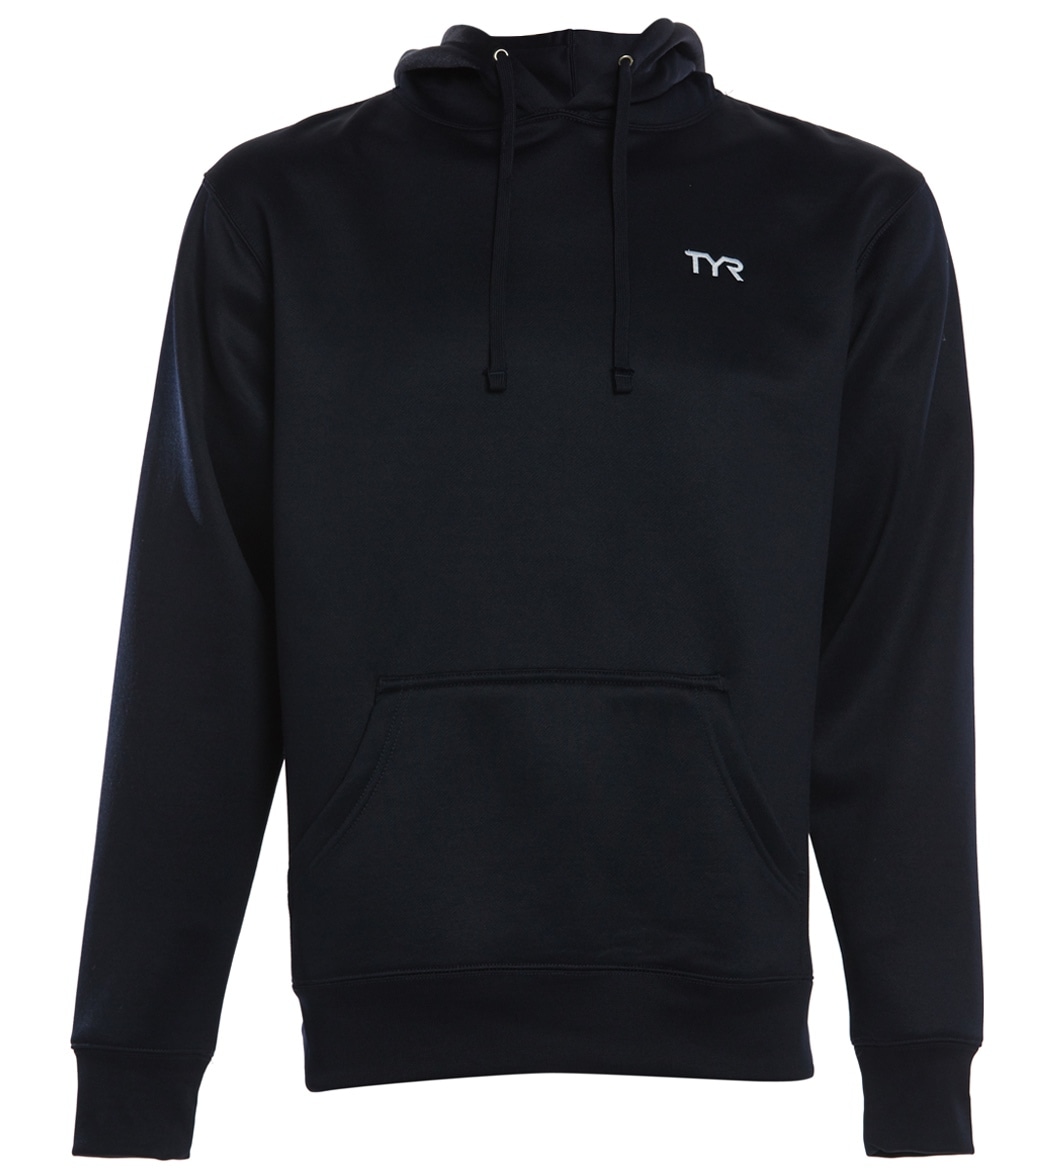 TYR Men's Alliance Pullover Hoodie - Navy Large Cotton/Polyester - Swimoutlet.com